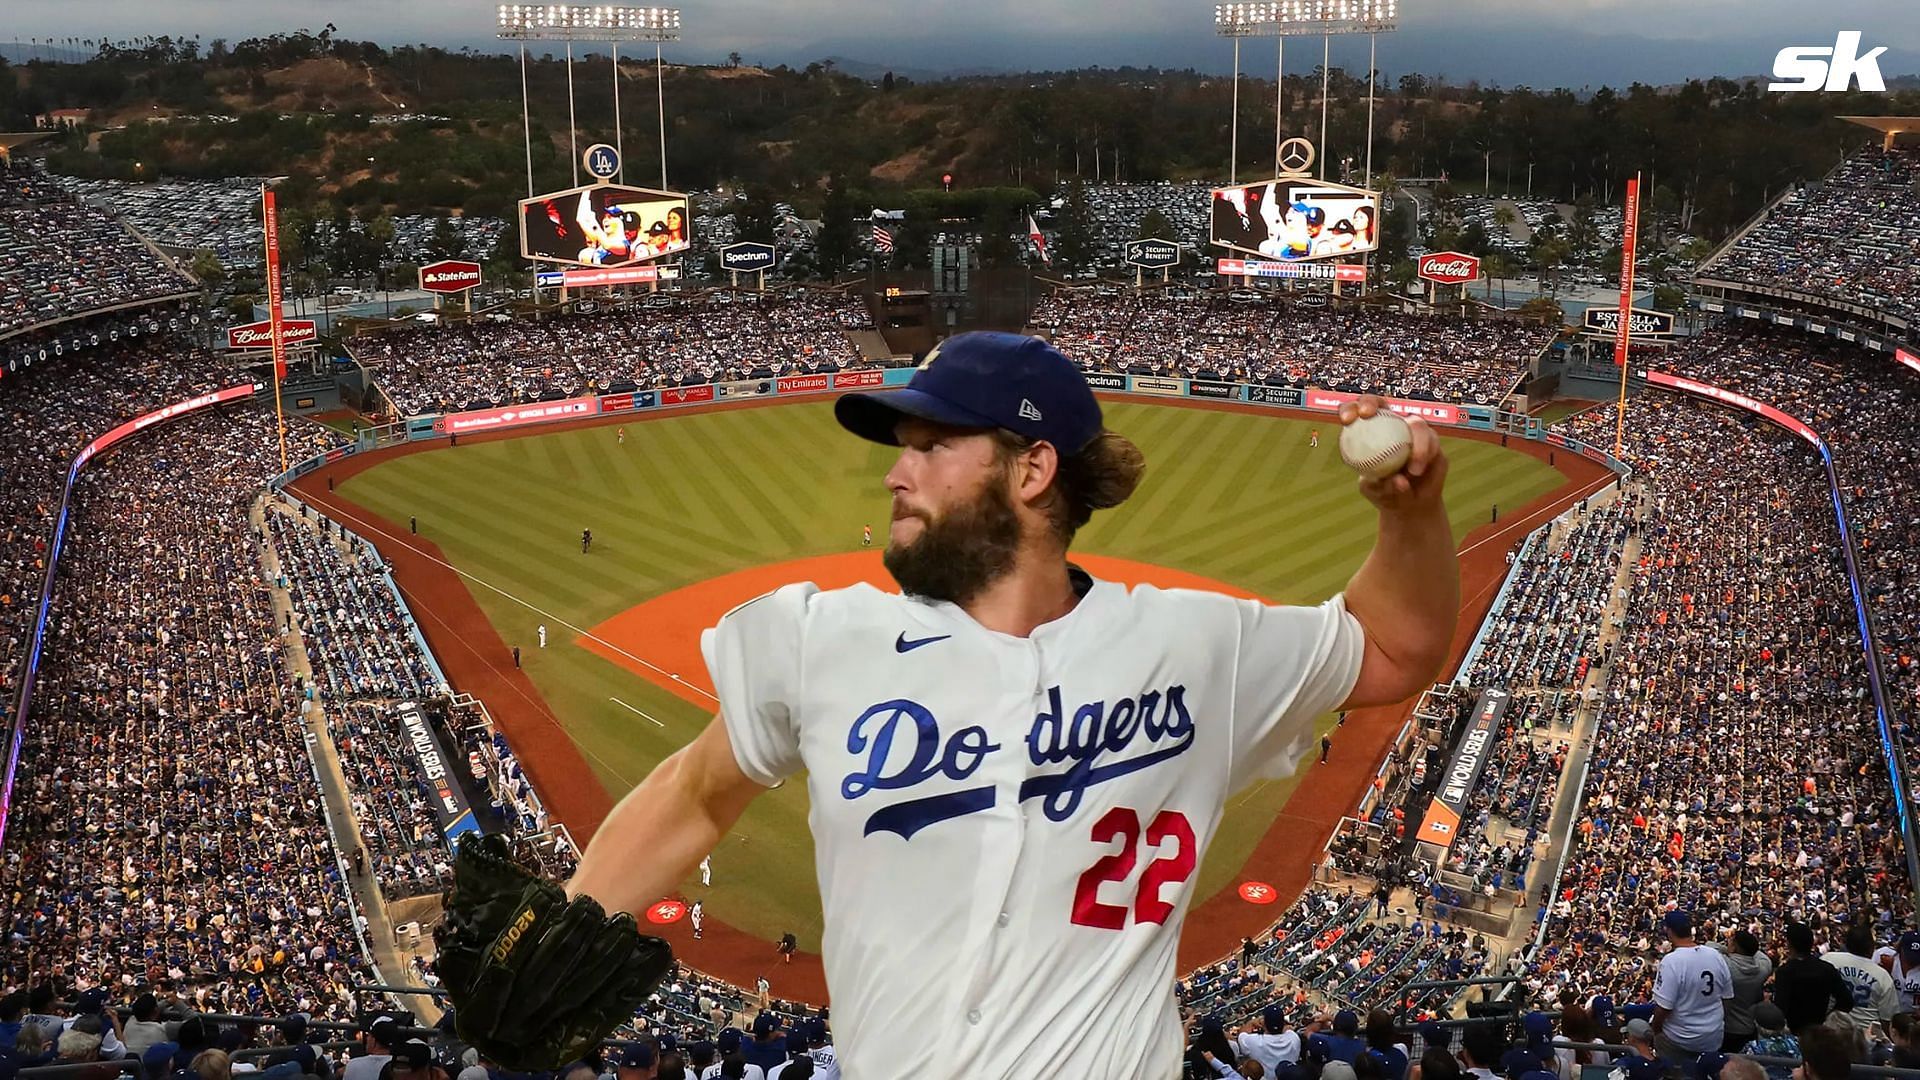 Dodgers Rumors: Writer Predicts Clayton Kershaw Retires After 2023 Season -  Inside the Dodgers